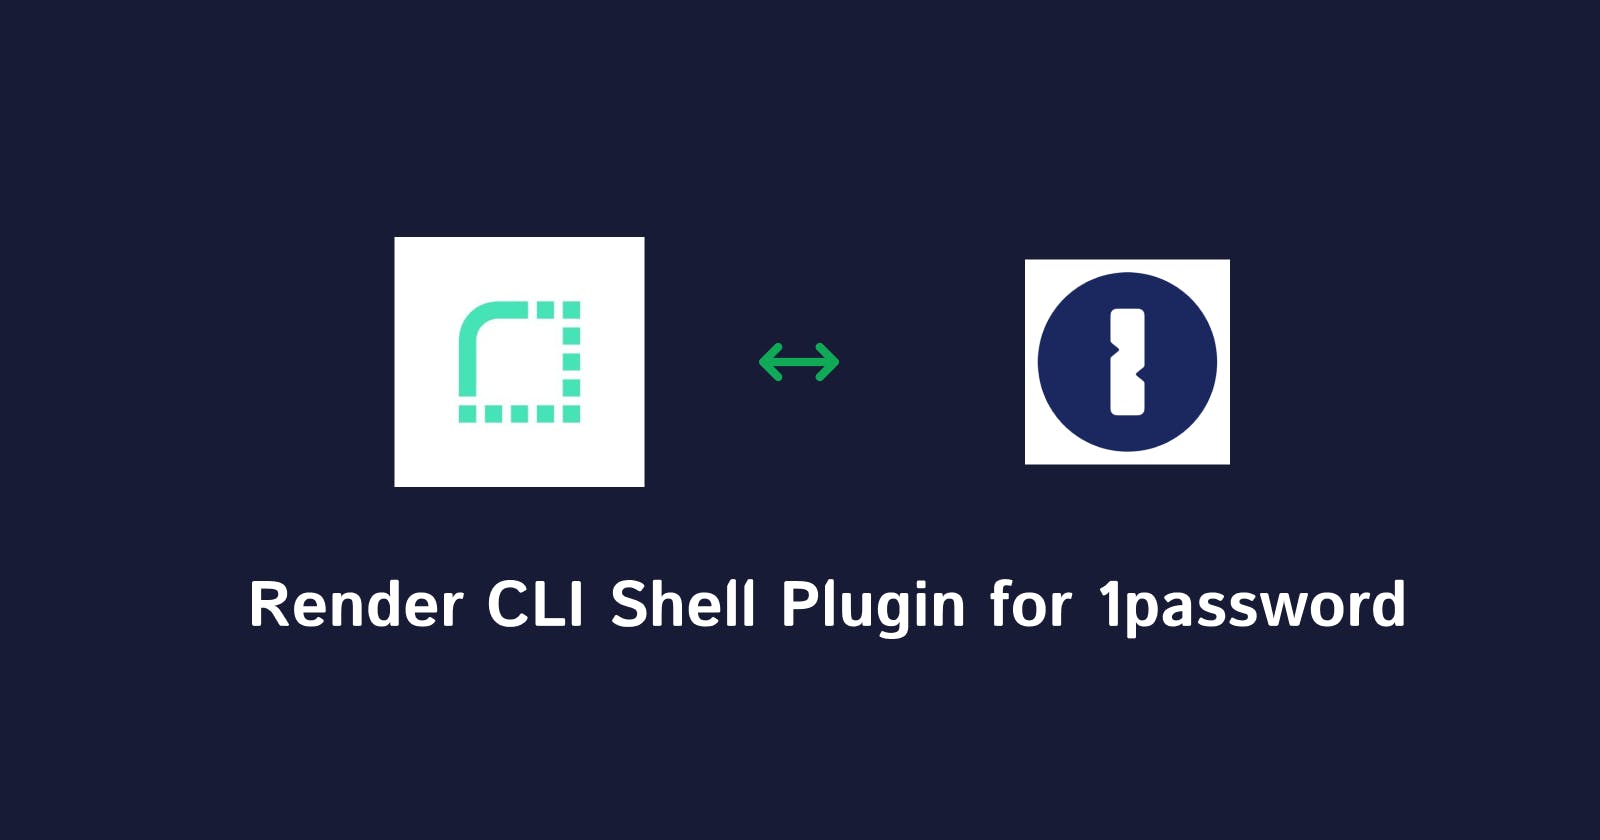 Render CLI Shell Plugin: A Guide on Building the Shell Plugin for 1Password.